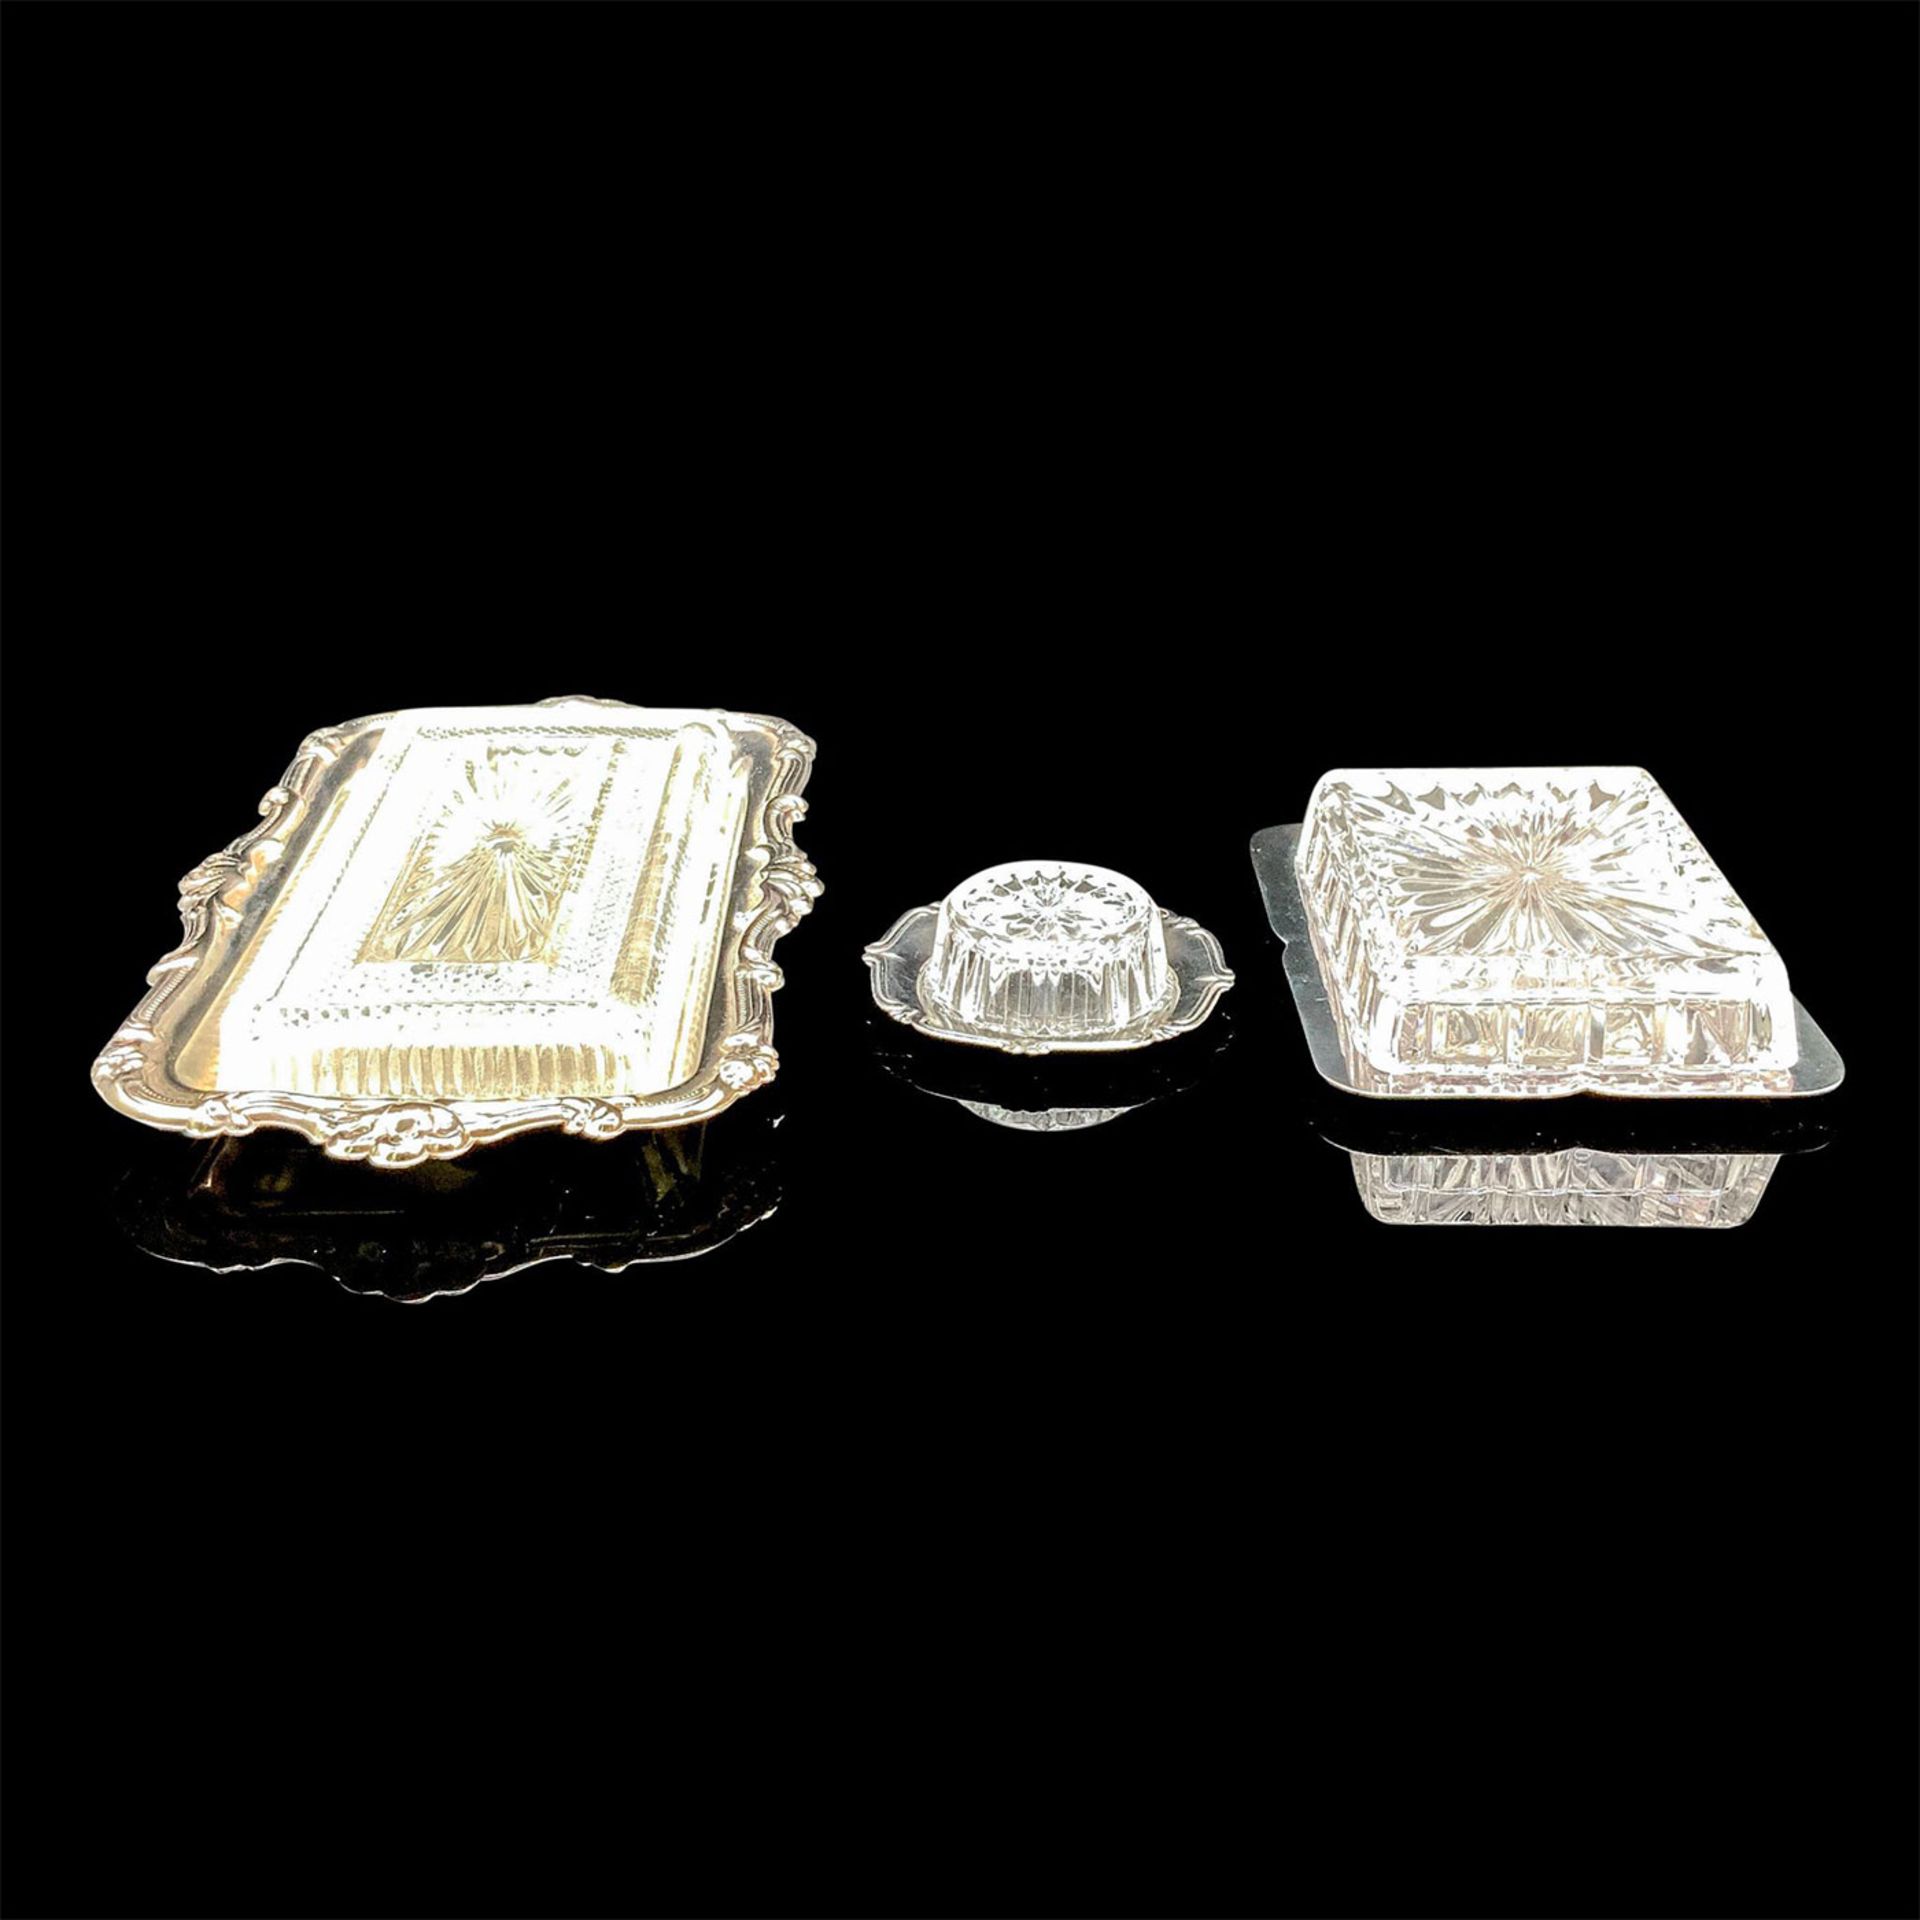 3pc Silver Coated Steel and Glass Serving Trays - Image 2 of 3